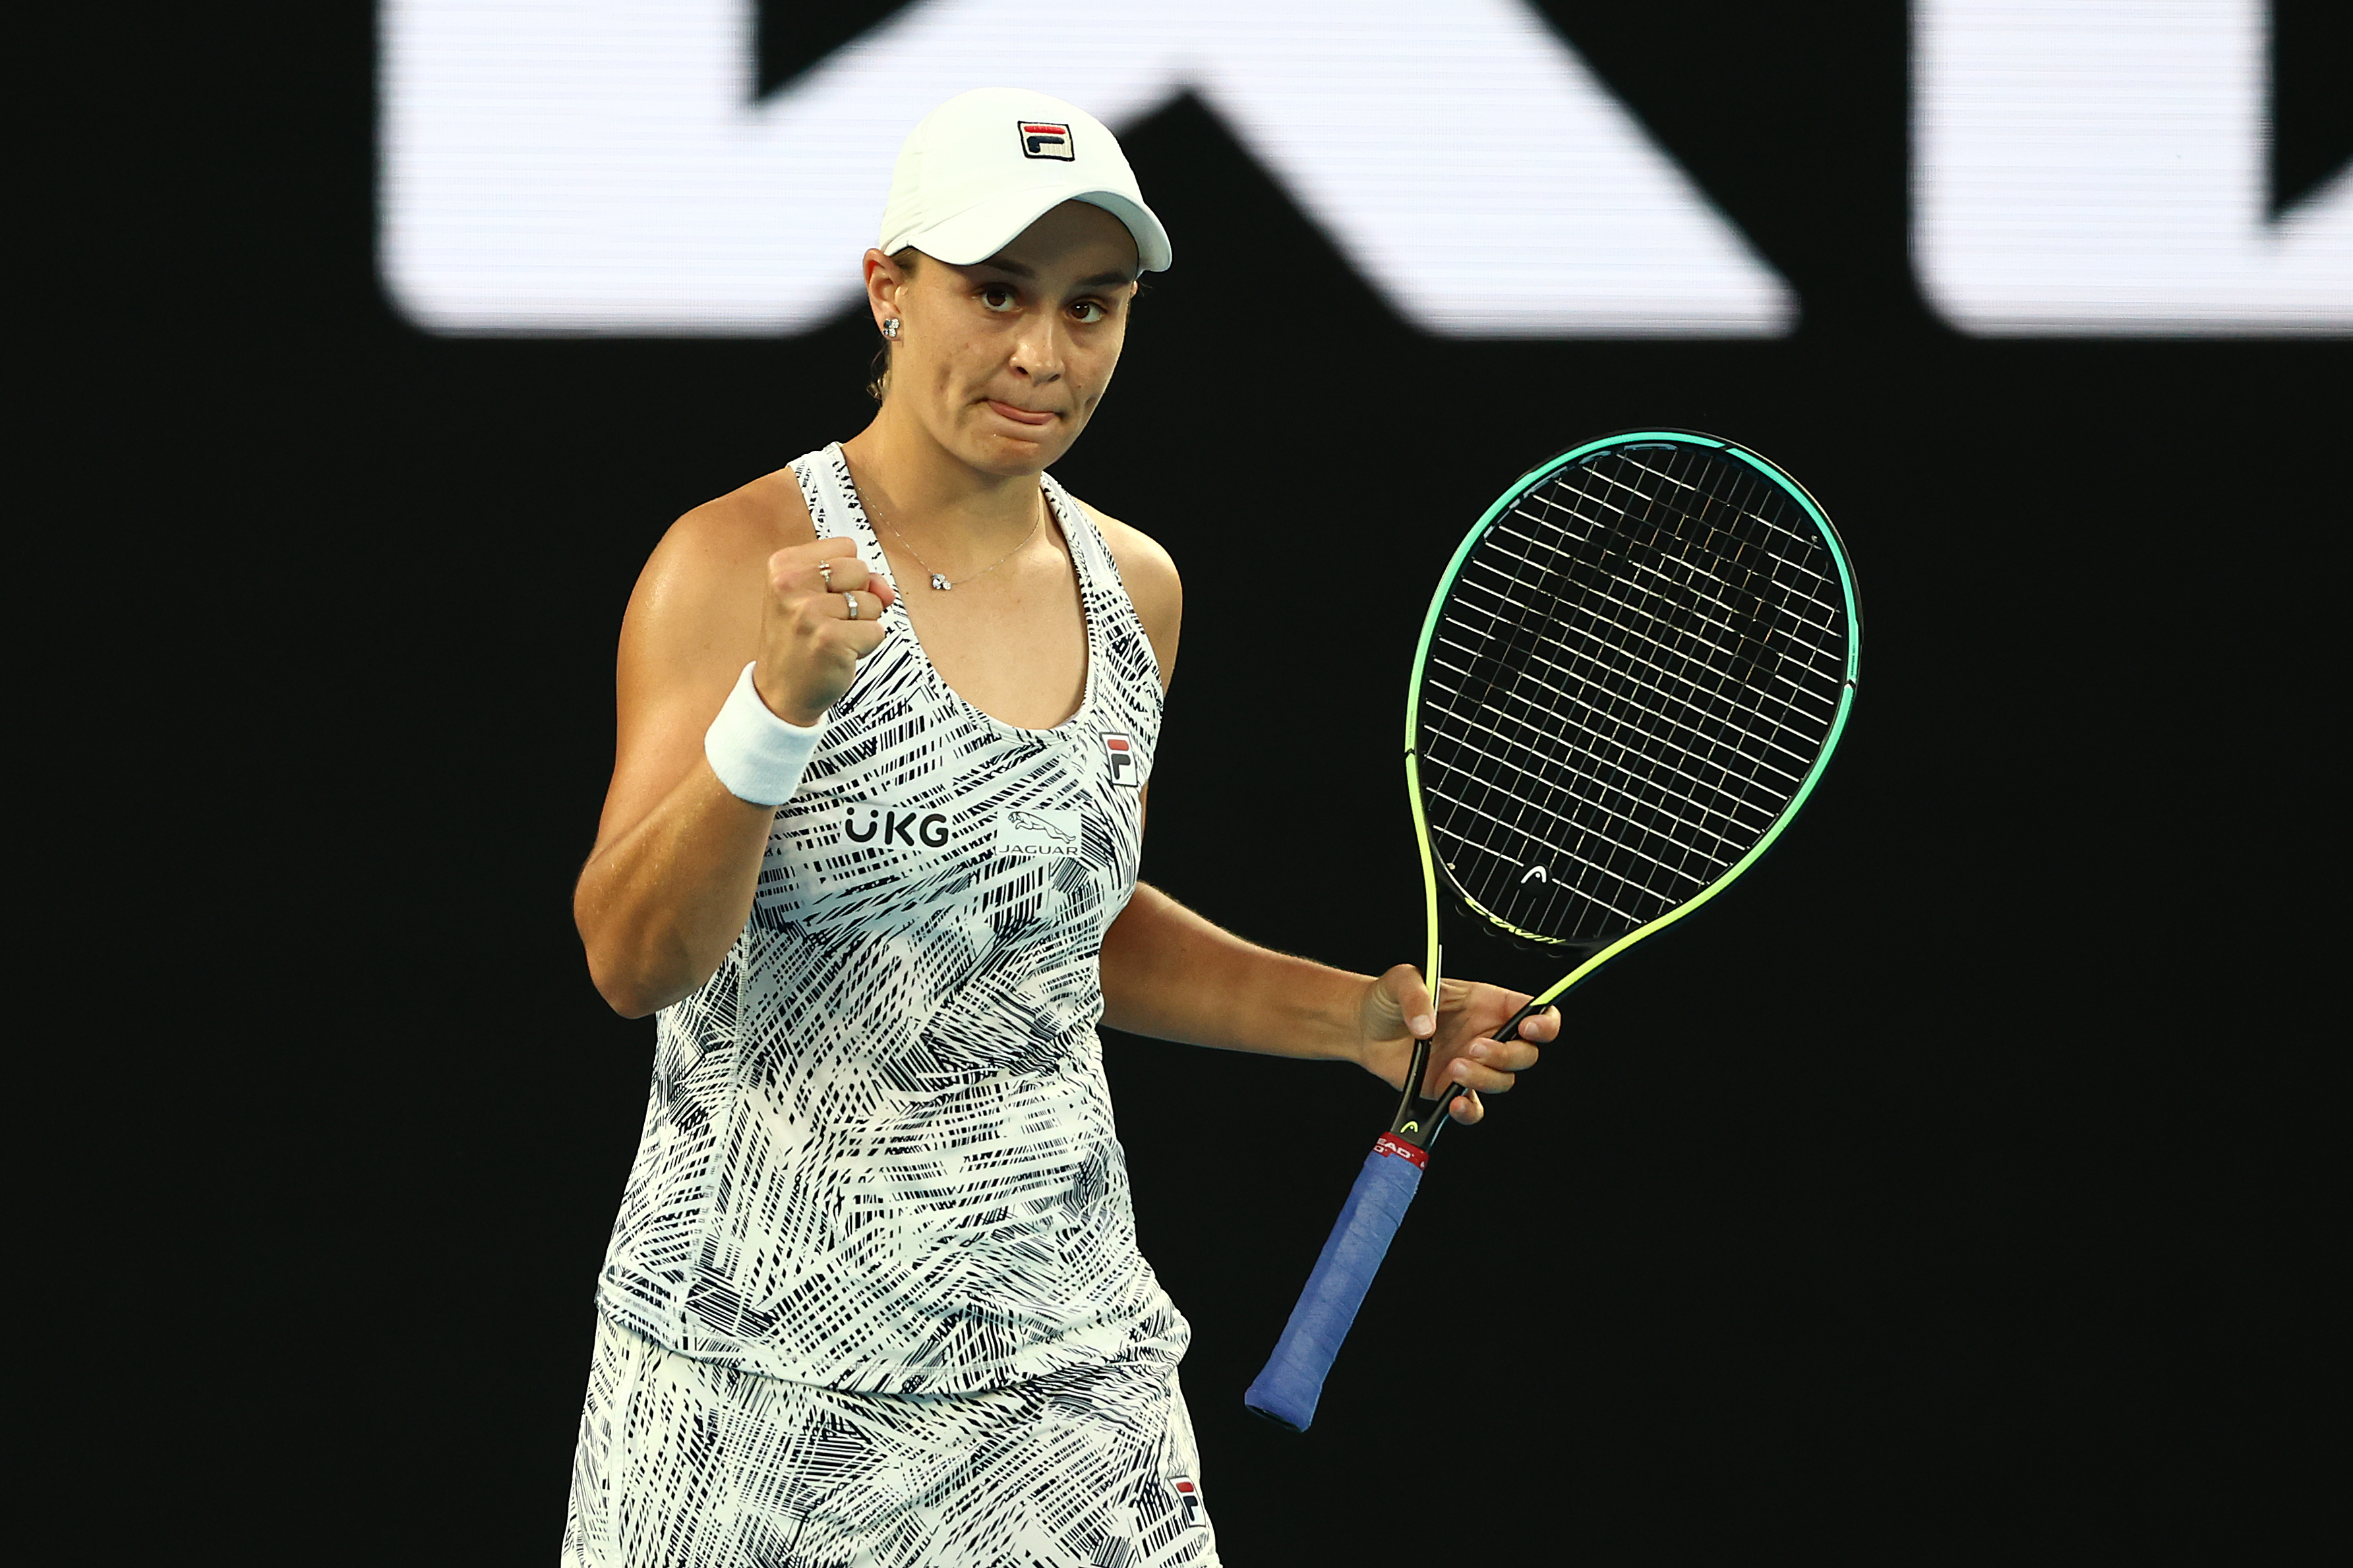 Ash Barty of Australia celebrates match point in her Women's Singles Quarterfinals match against Jessica Pegula.